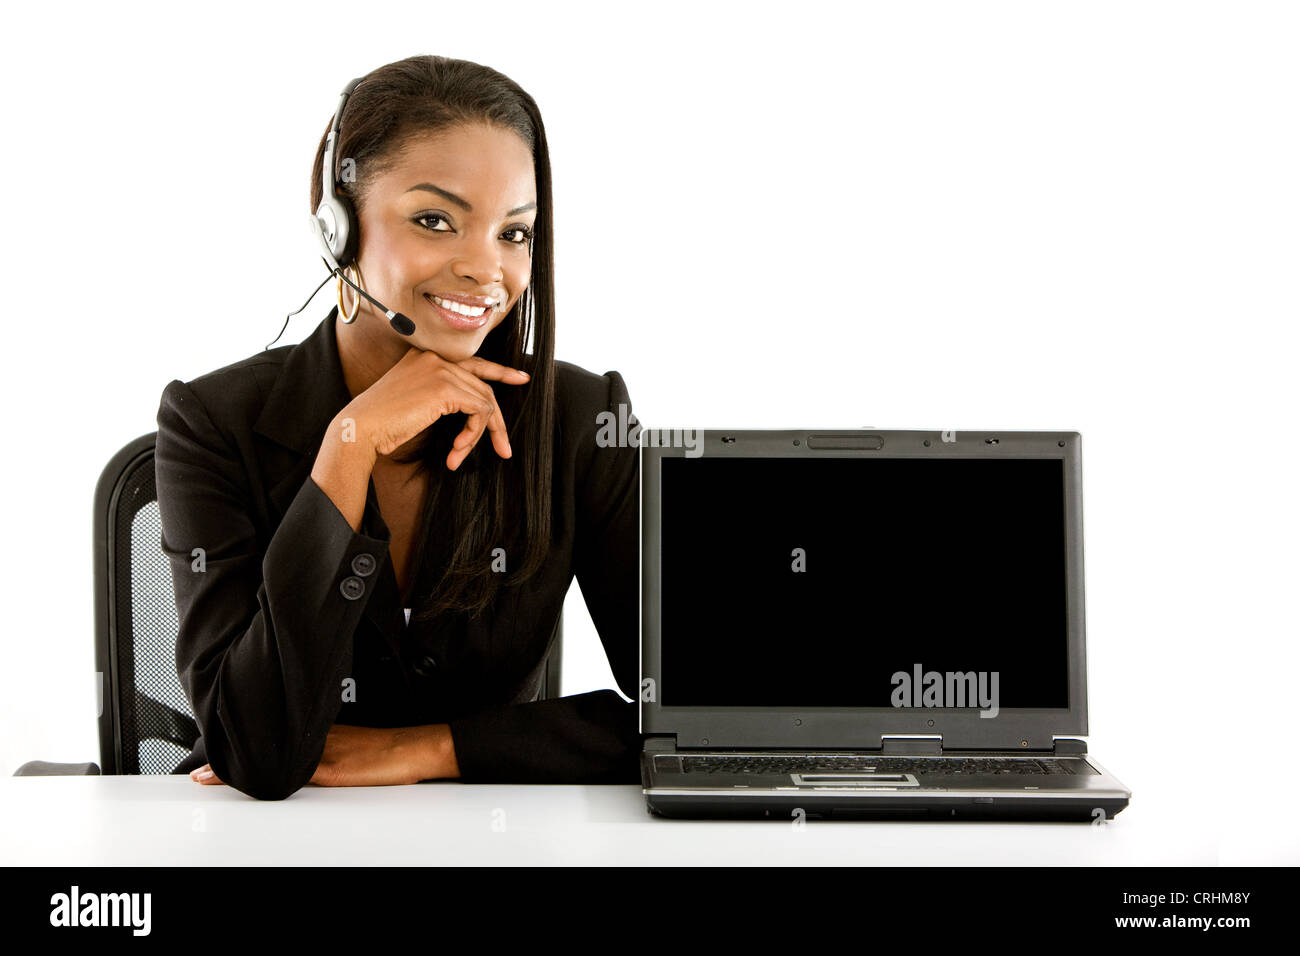 dark-skinned young woman with headset and laptop Stock Photo